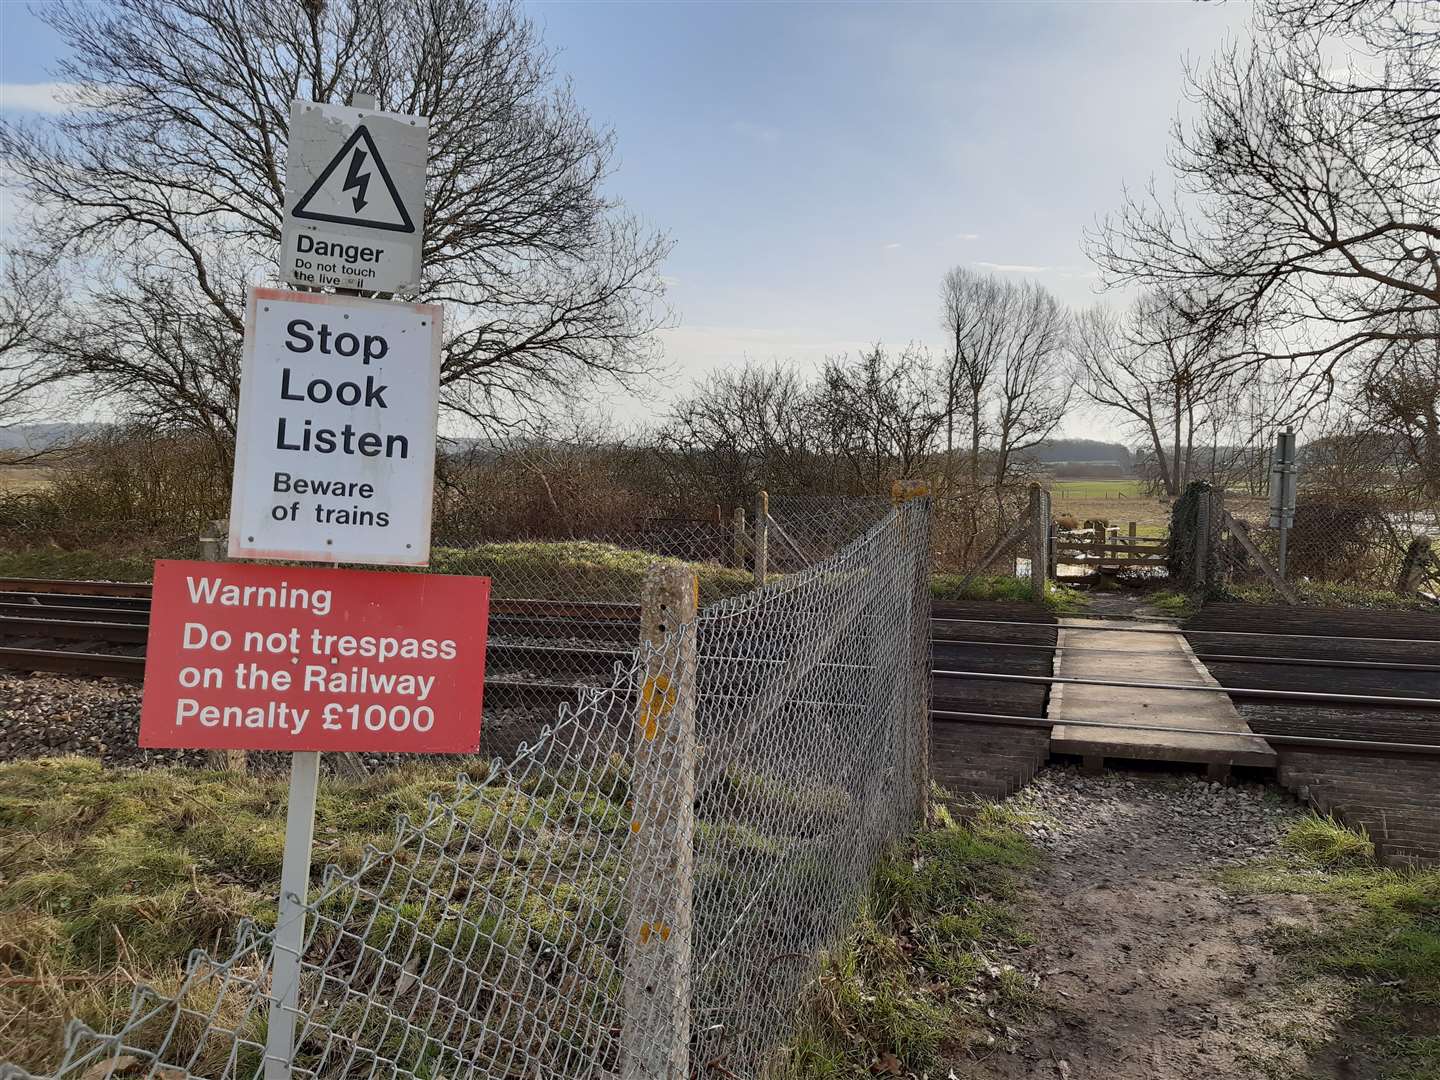 A new pedestrian and cycle bridge over the railway line will also be included